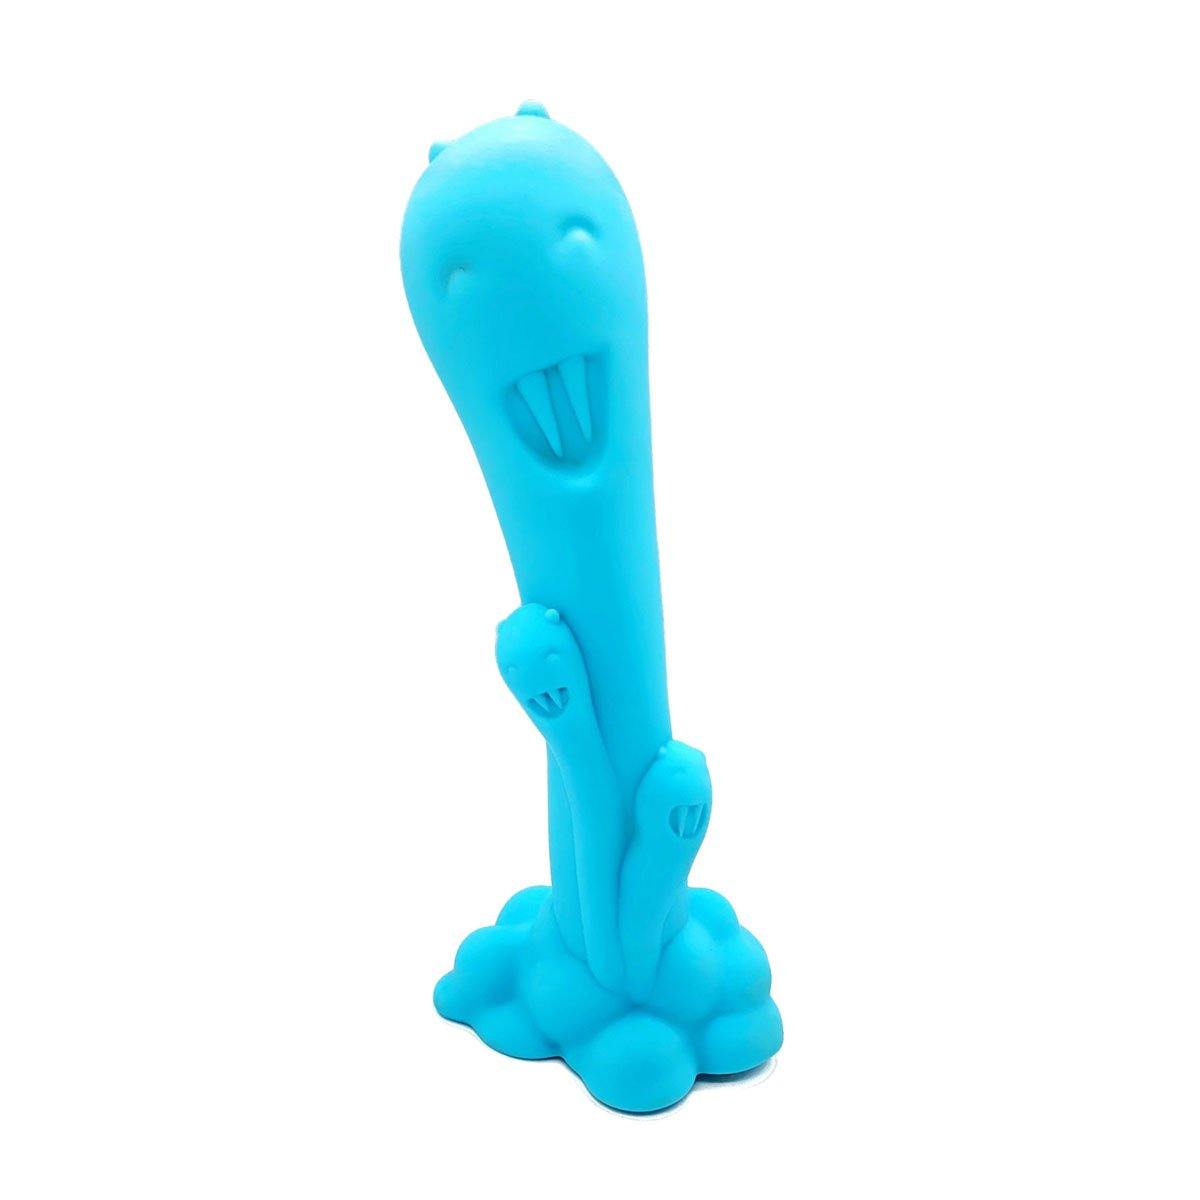 Cute Little Fuckers Trinity - Buy At Luxury Toy X - Free 3-Day Shipping